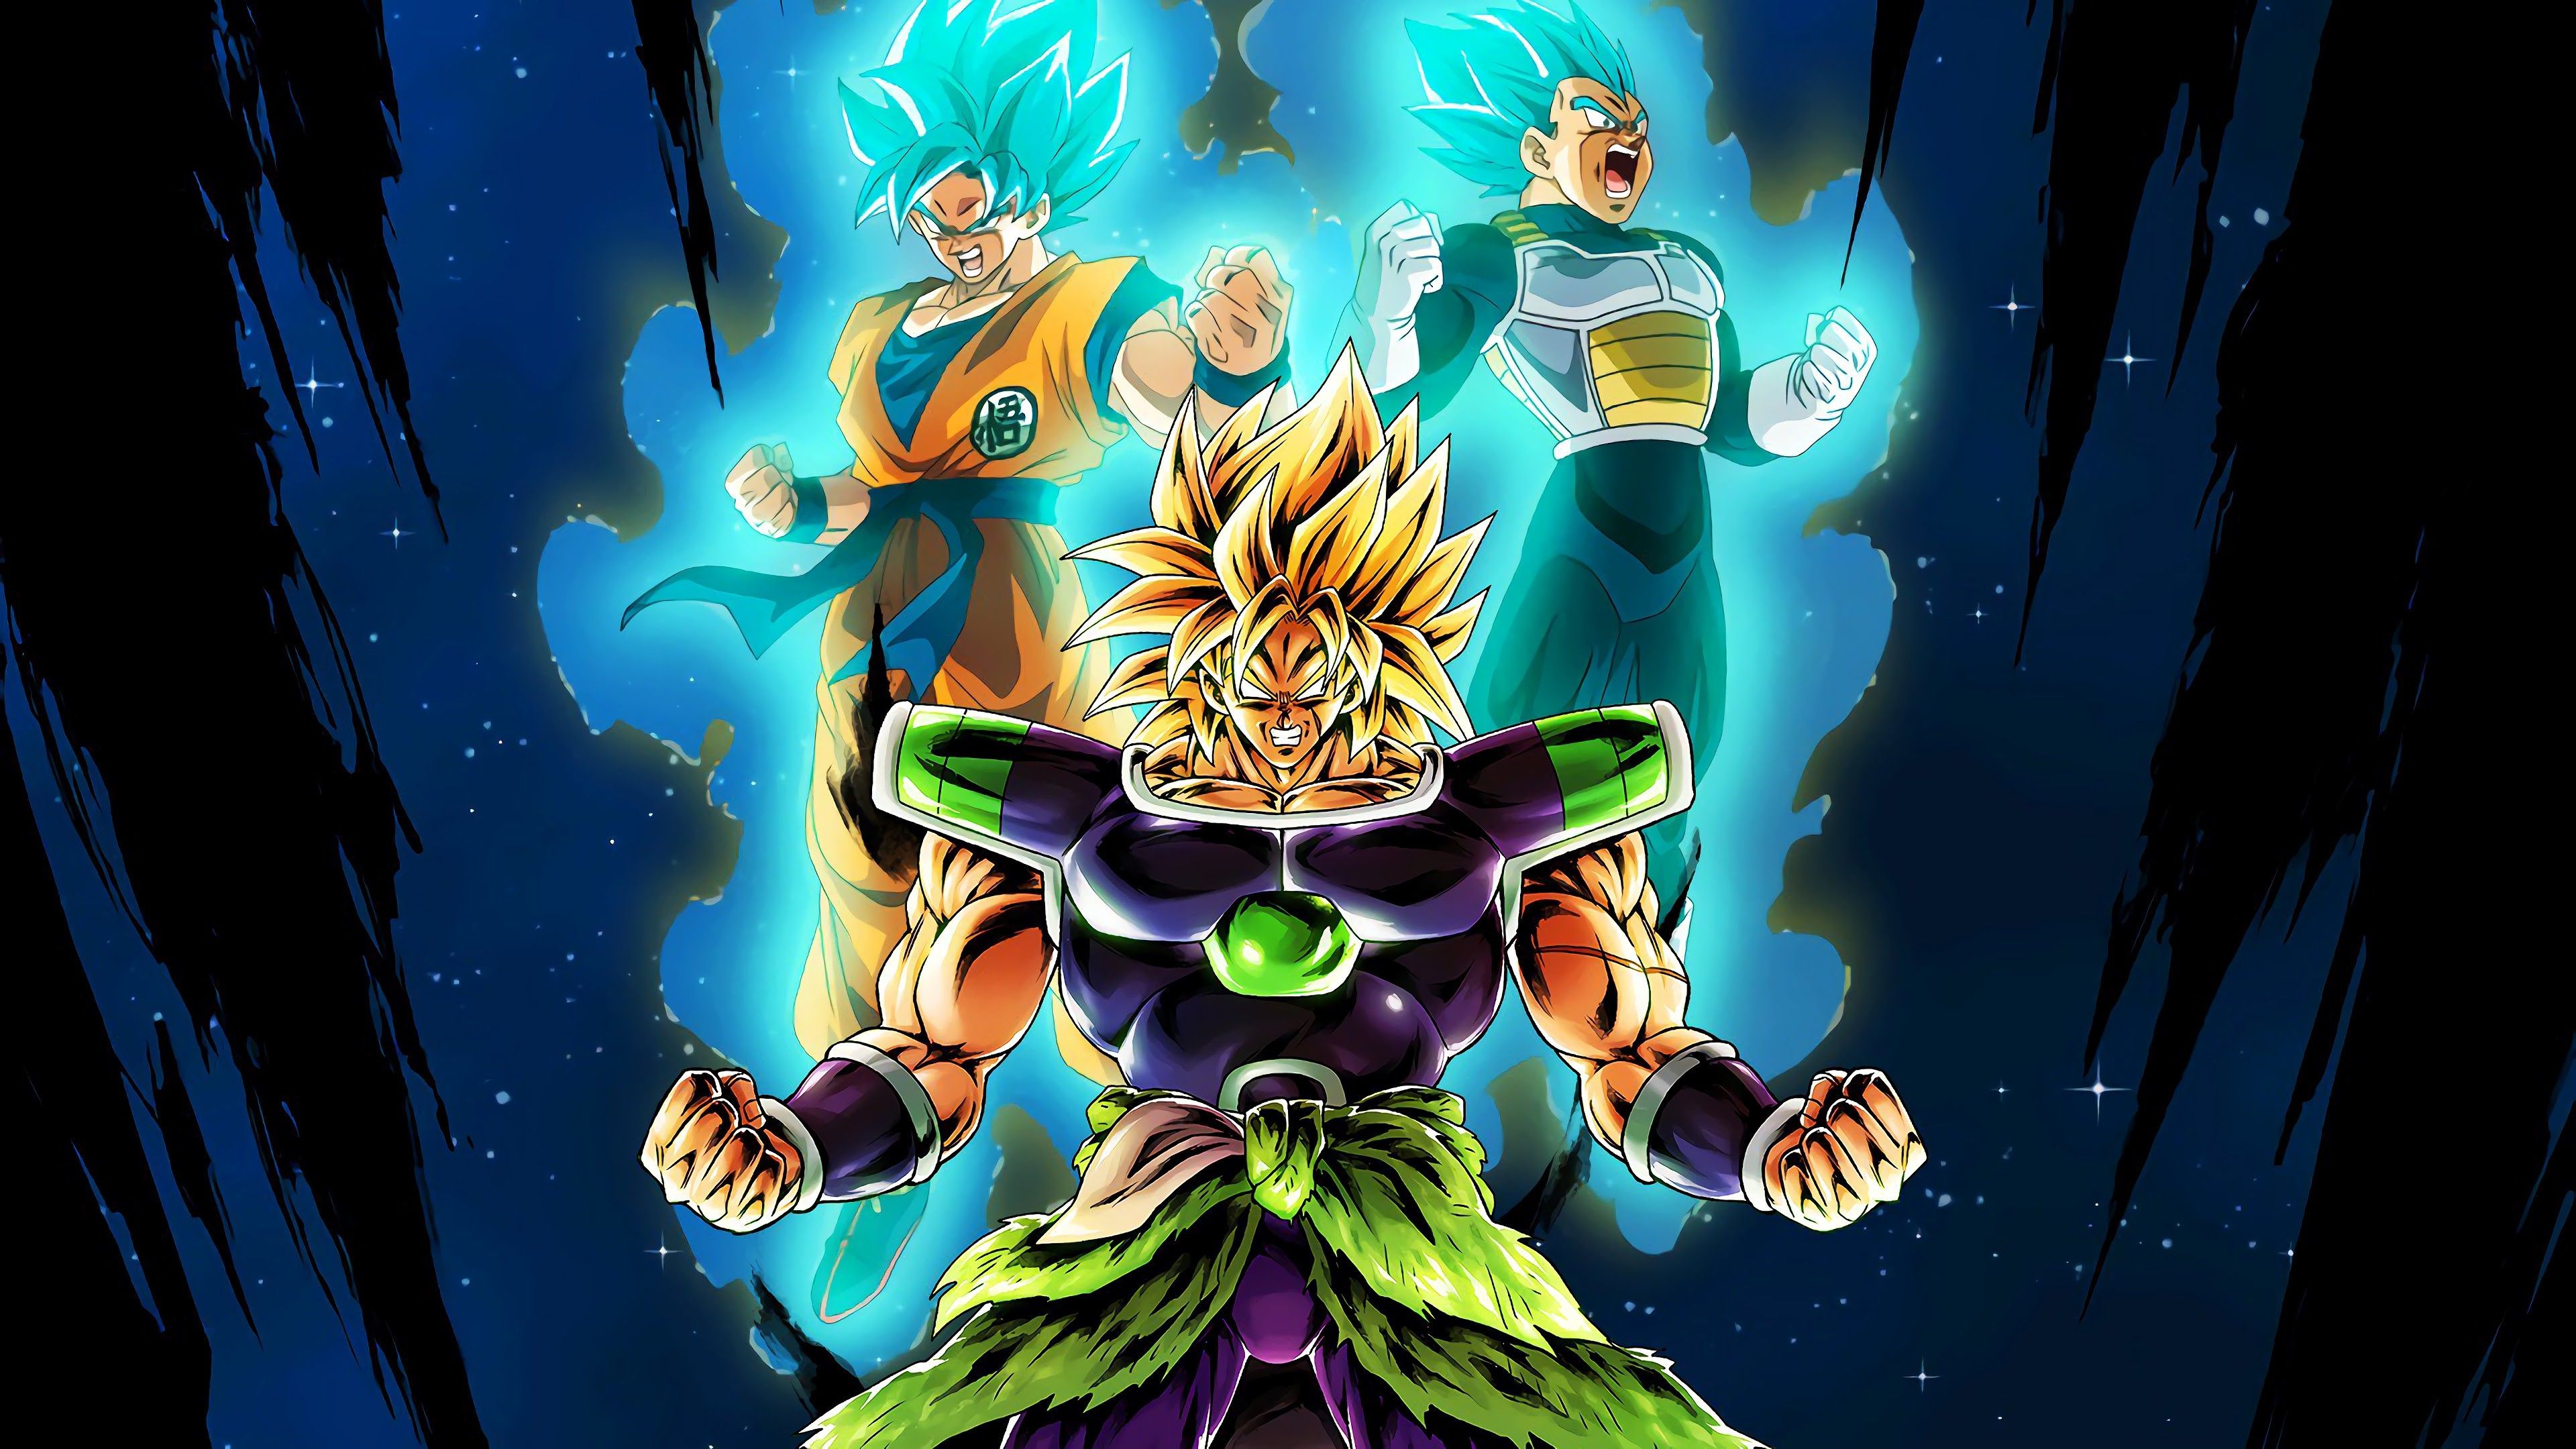 Dbz Broly Wallpaper (best Dbz Broly Wallpaper and image) on WallpaperChat